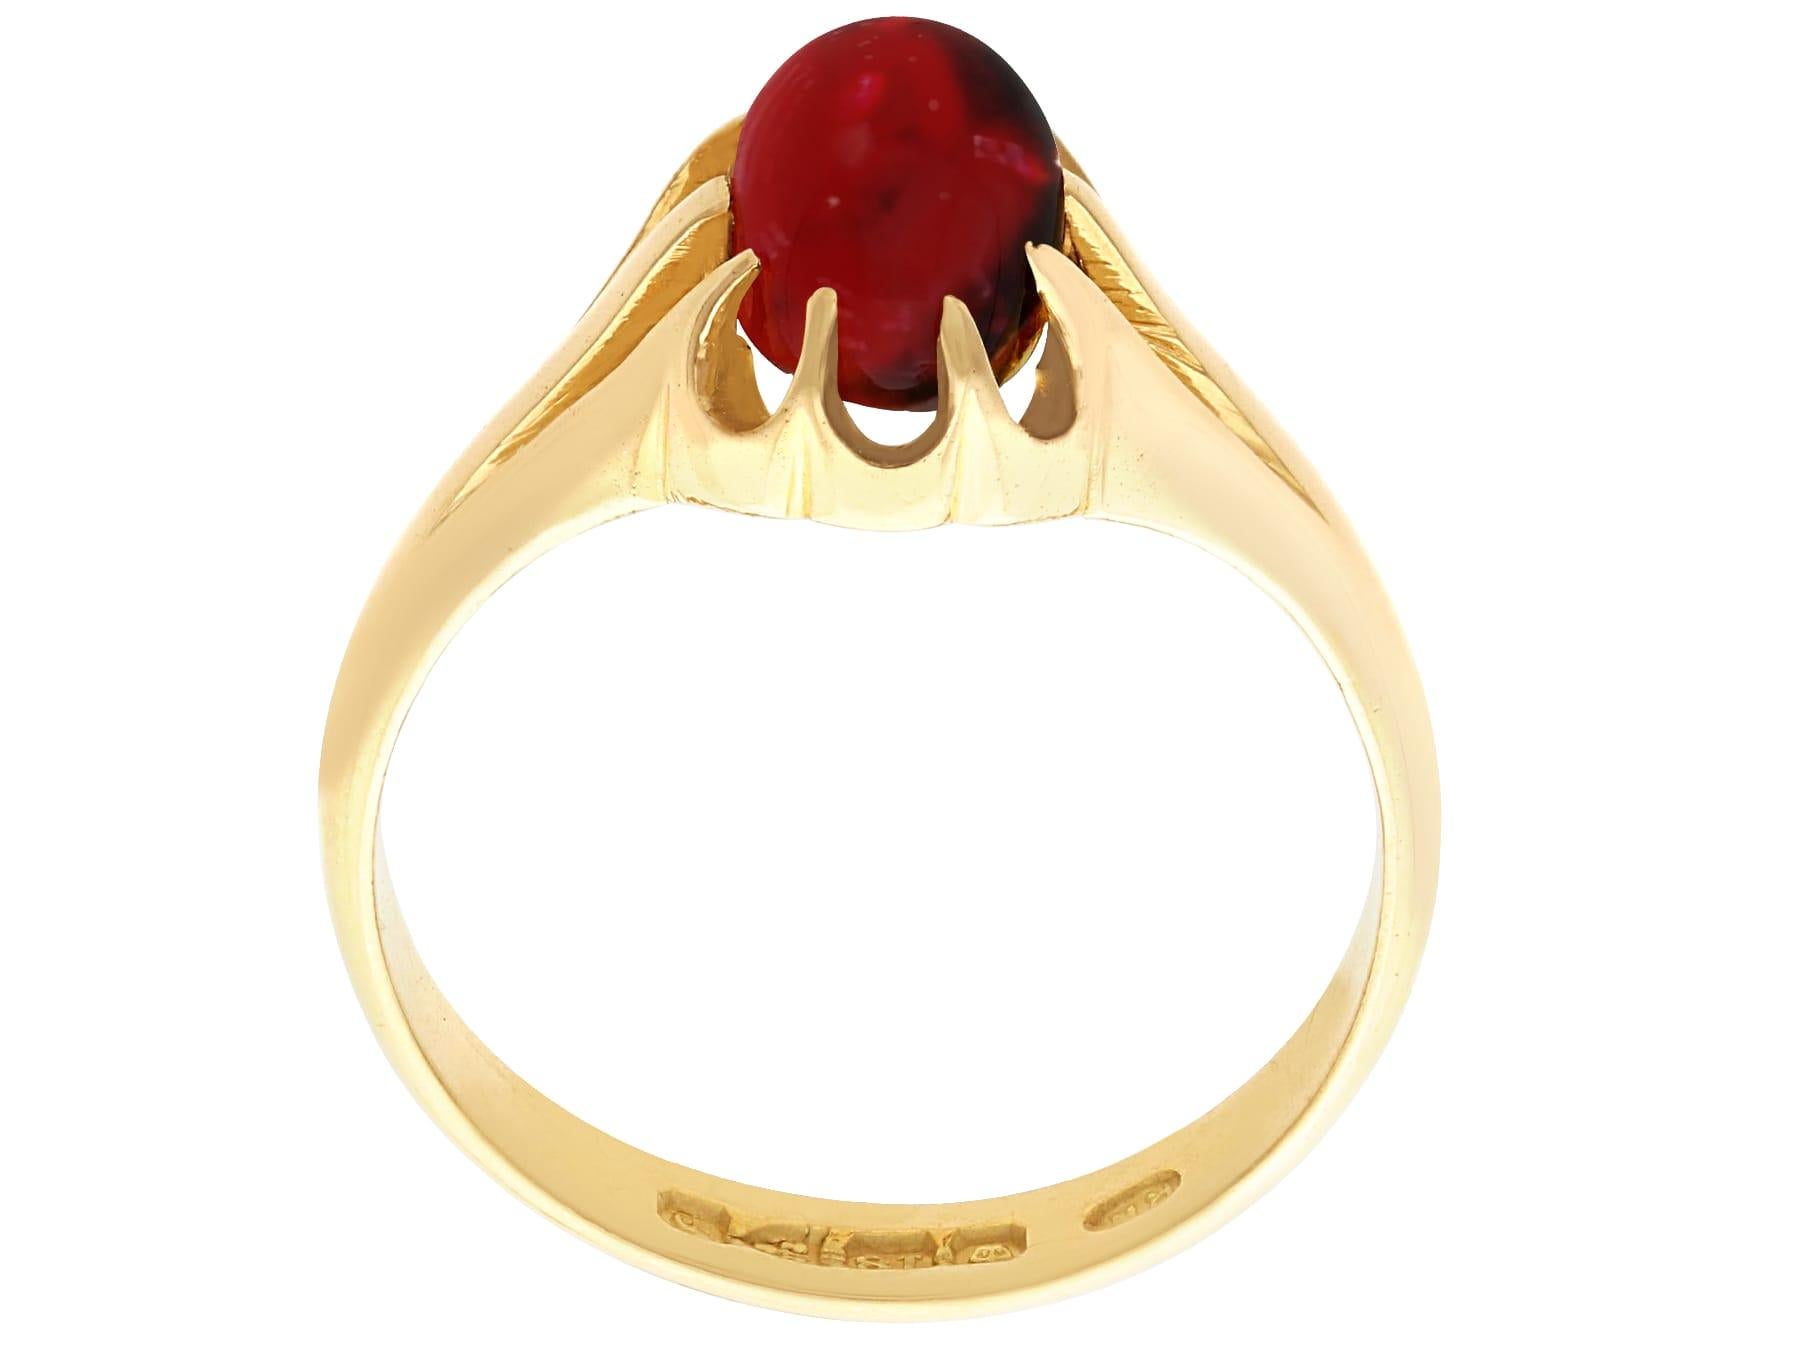 Women's or Men's Antique 3.05 Carat Garnet and 18k Yellow Gold Dress Ring (1918) For Sale